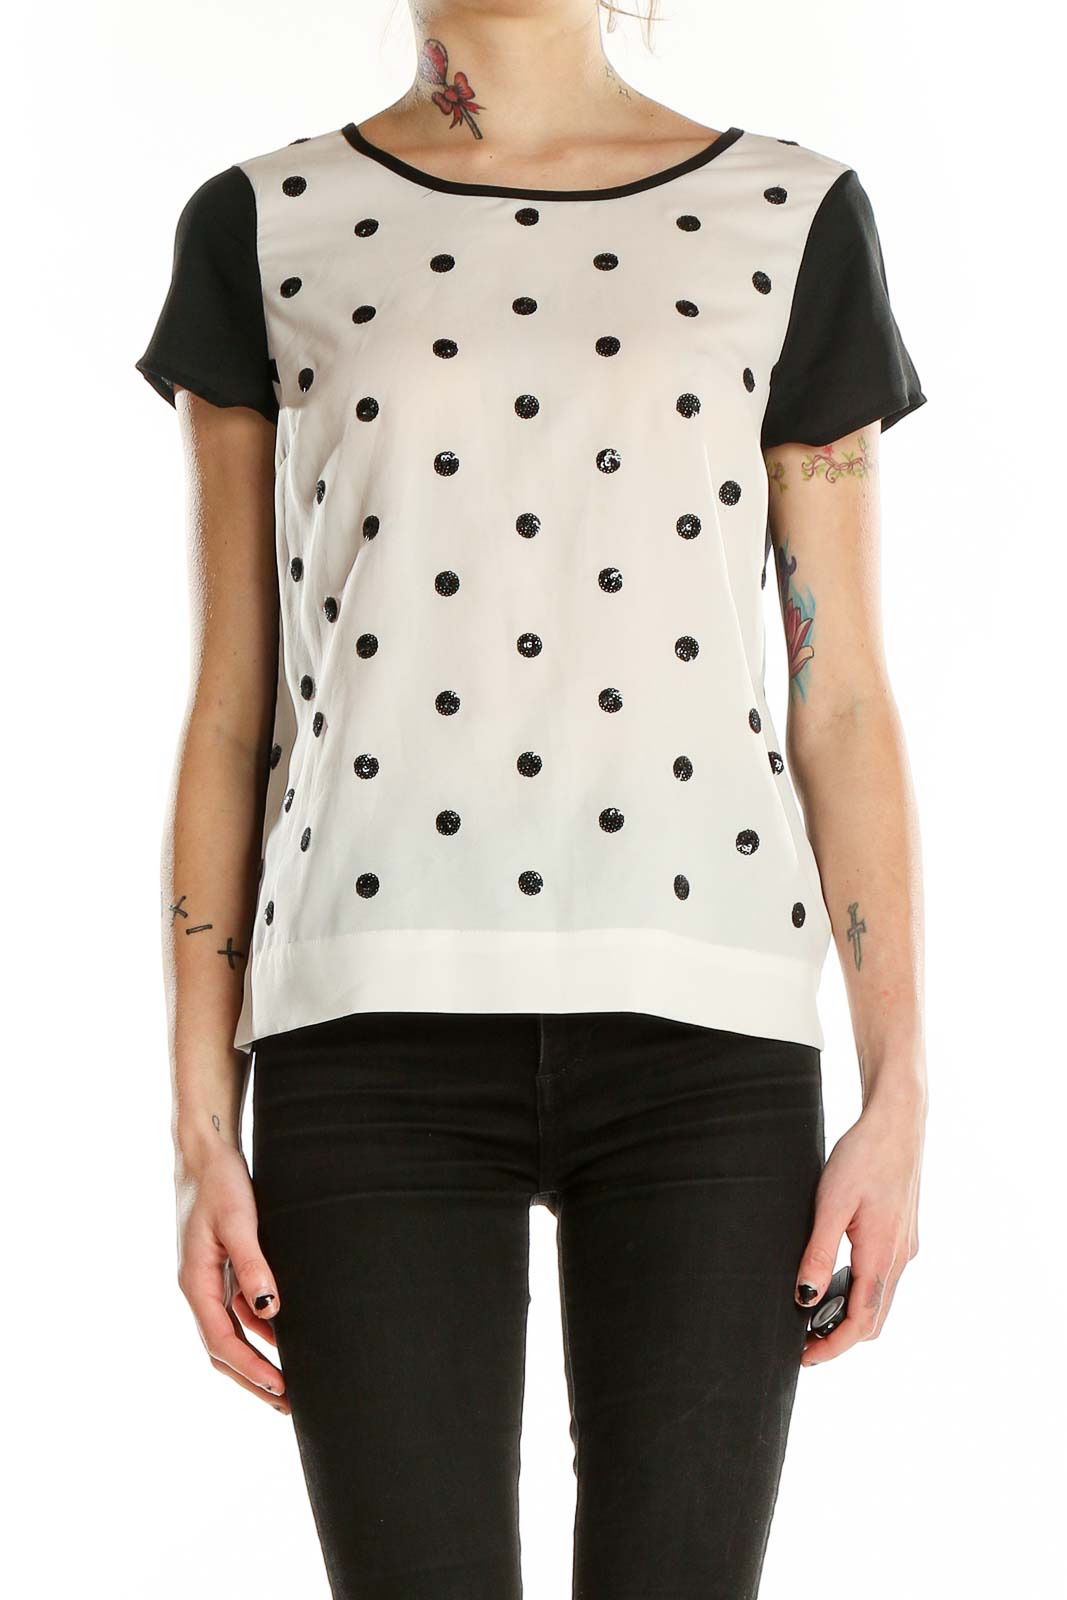 White Black Sequin Polka Dots Top Front